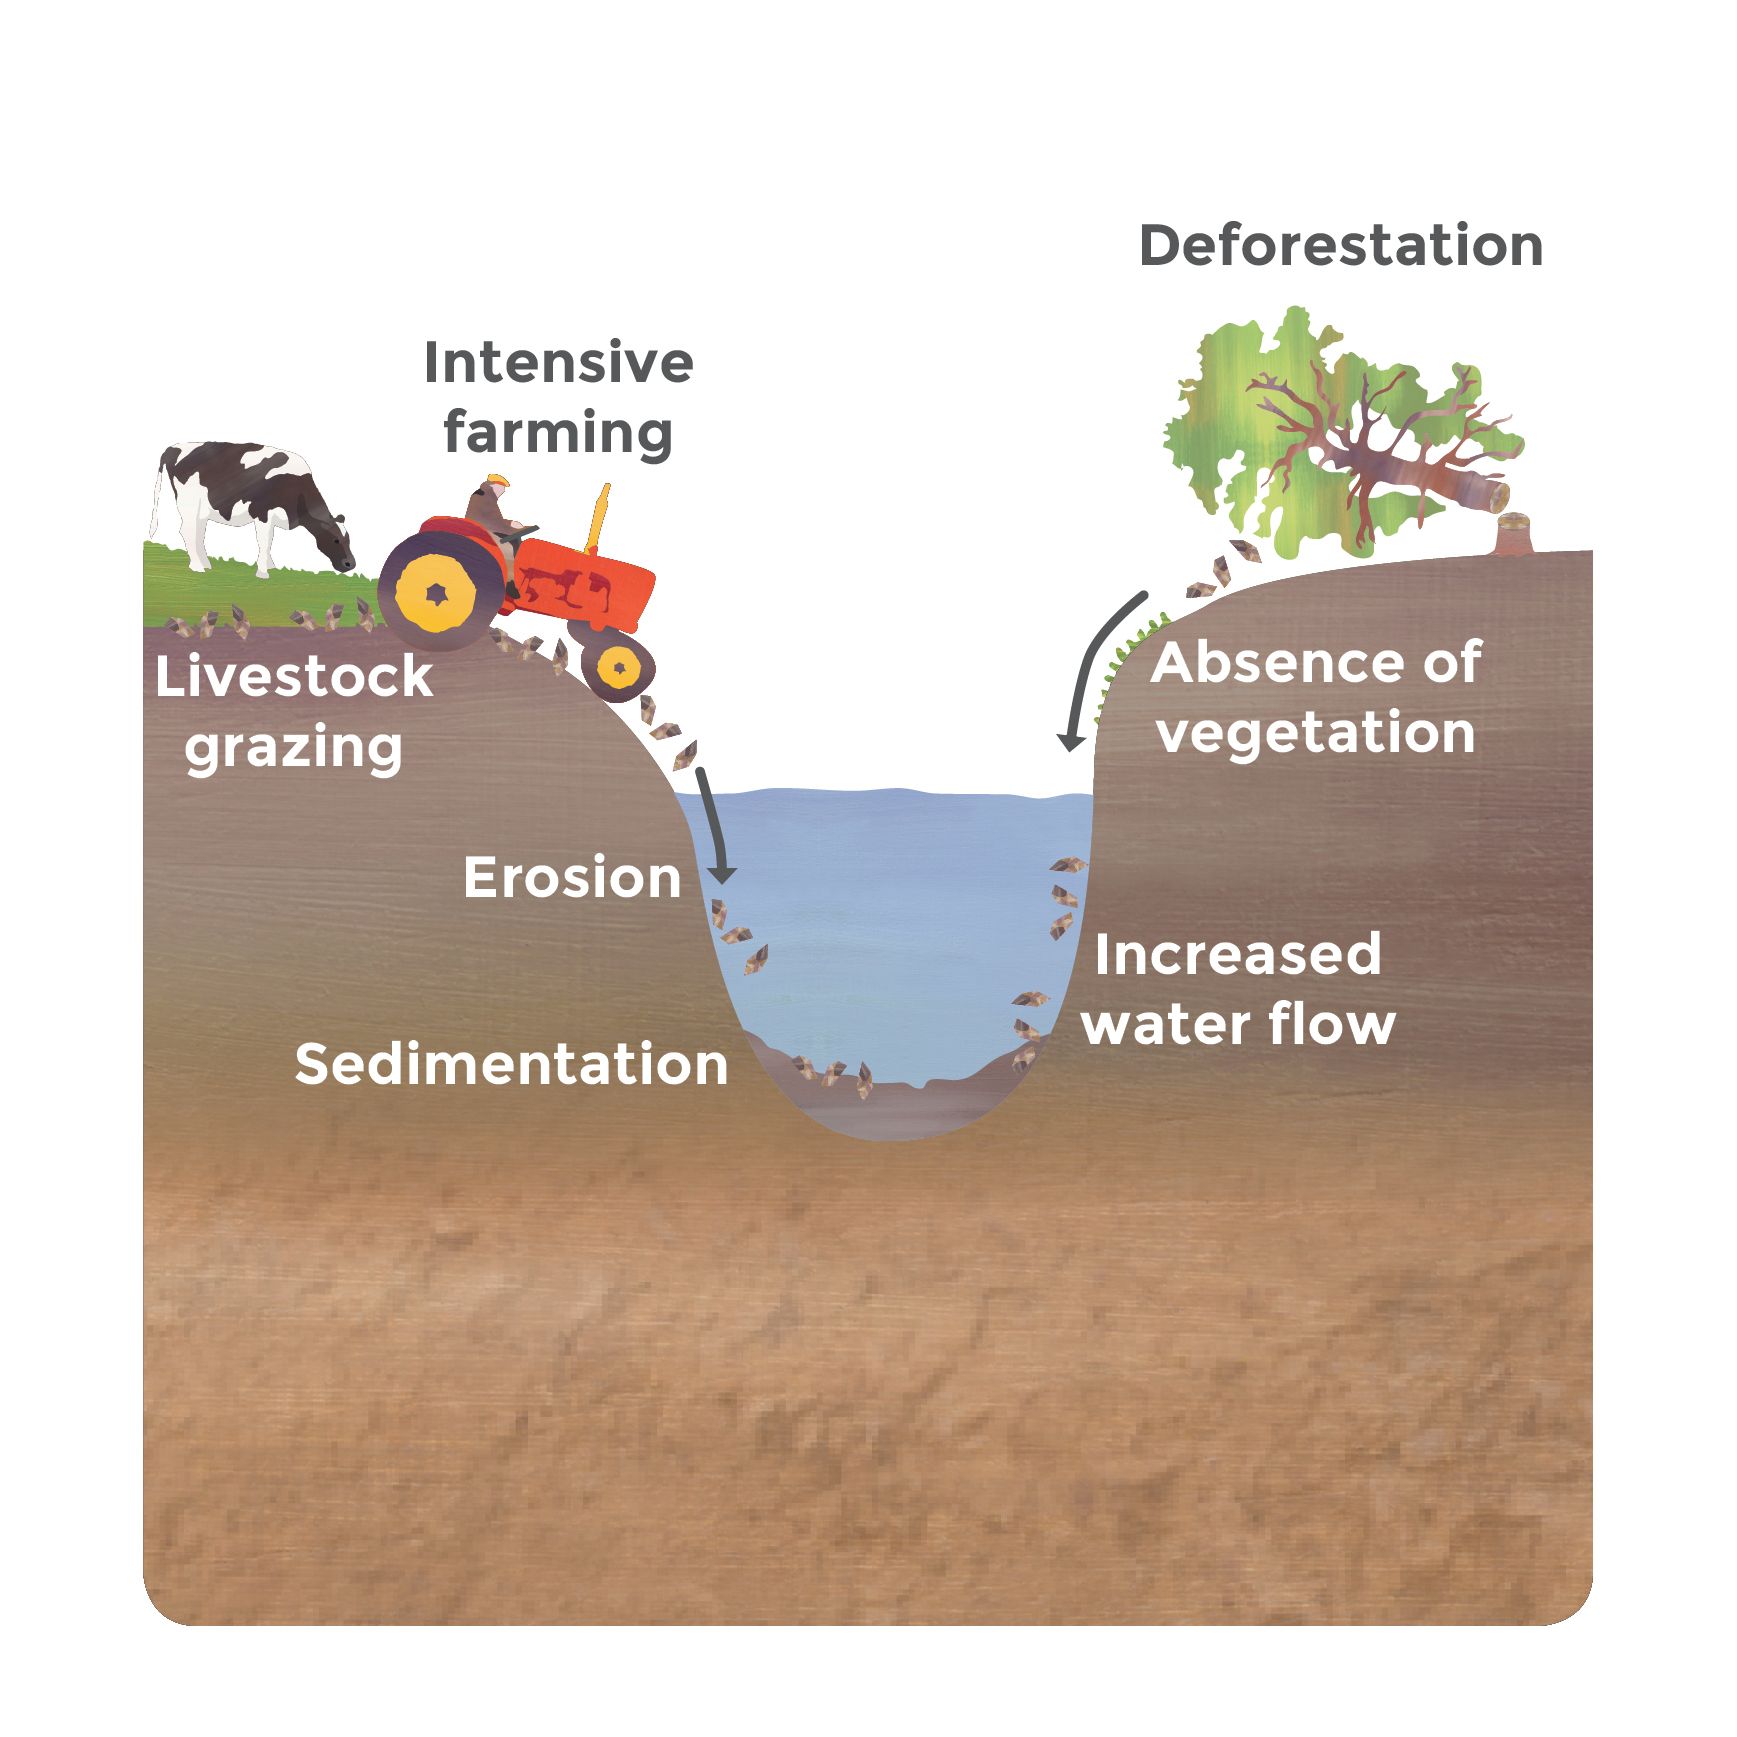 Things that lead to soil erosion like intensive farming and grazing, and deforestation